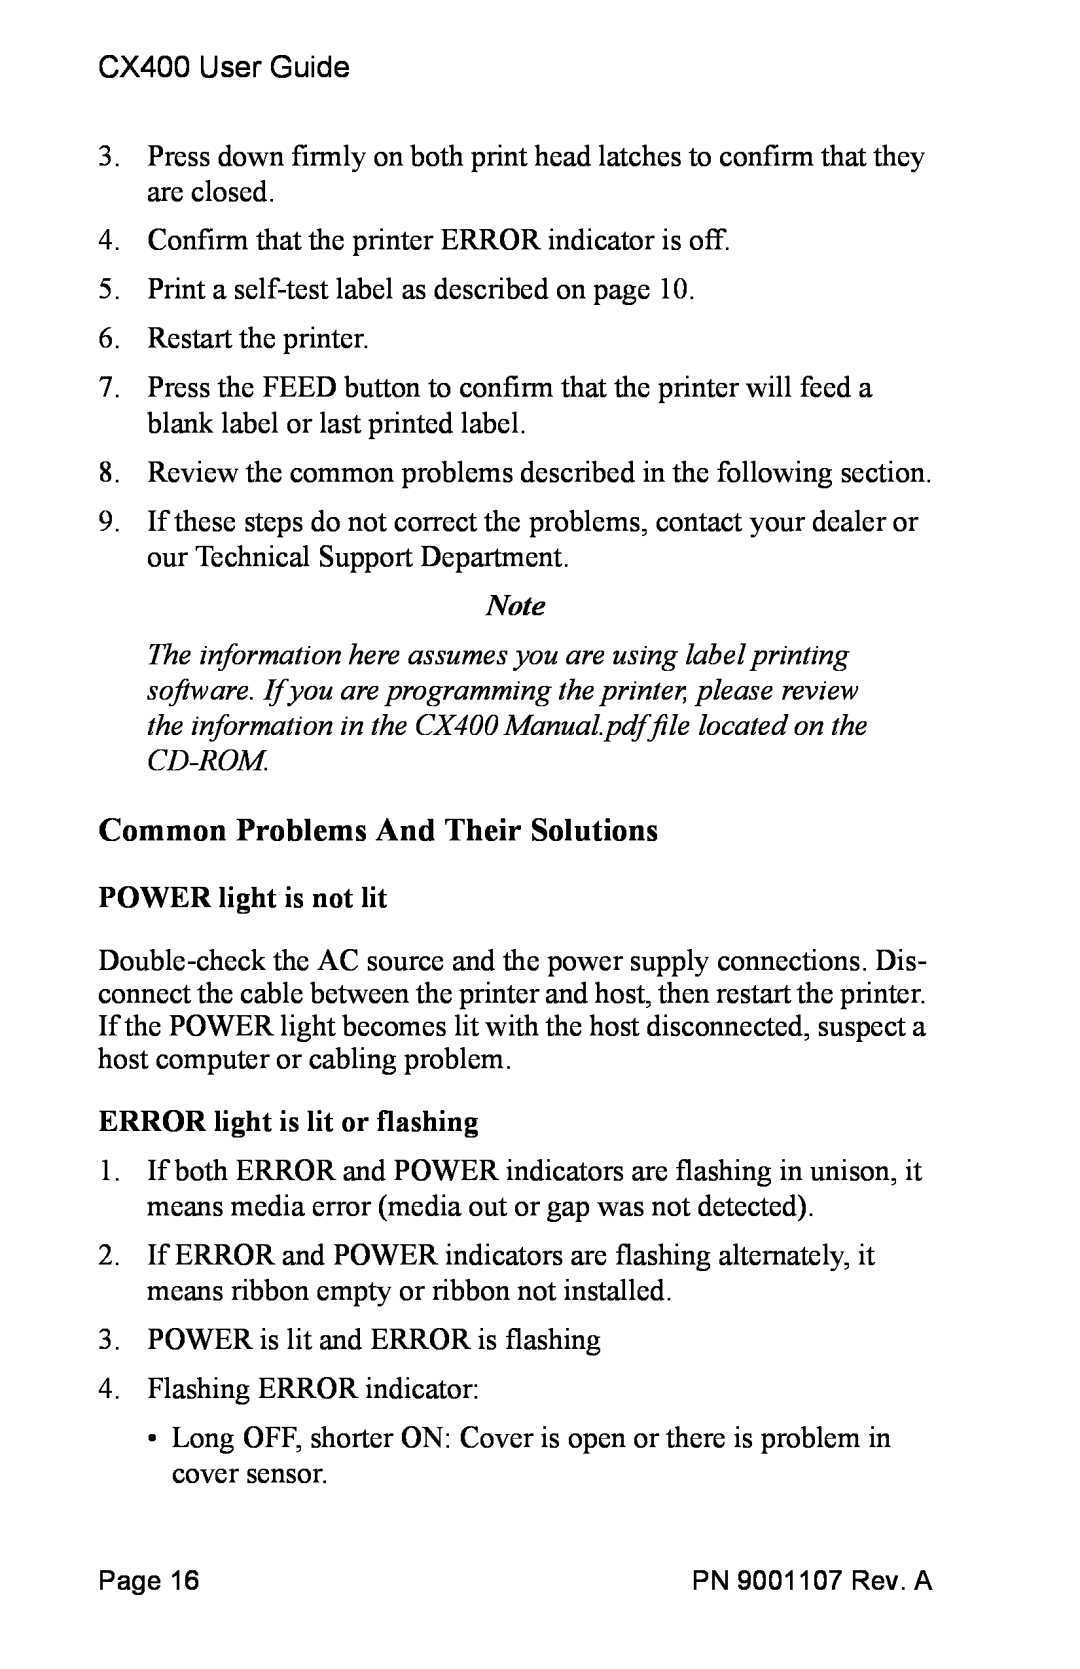 SATO 400 manual Common Problems And Their Solutions, POWER light is not lit, ERROR light is lit or flashing 